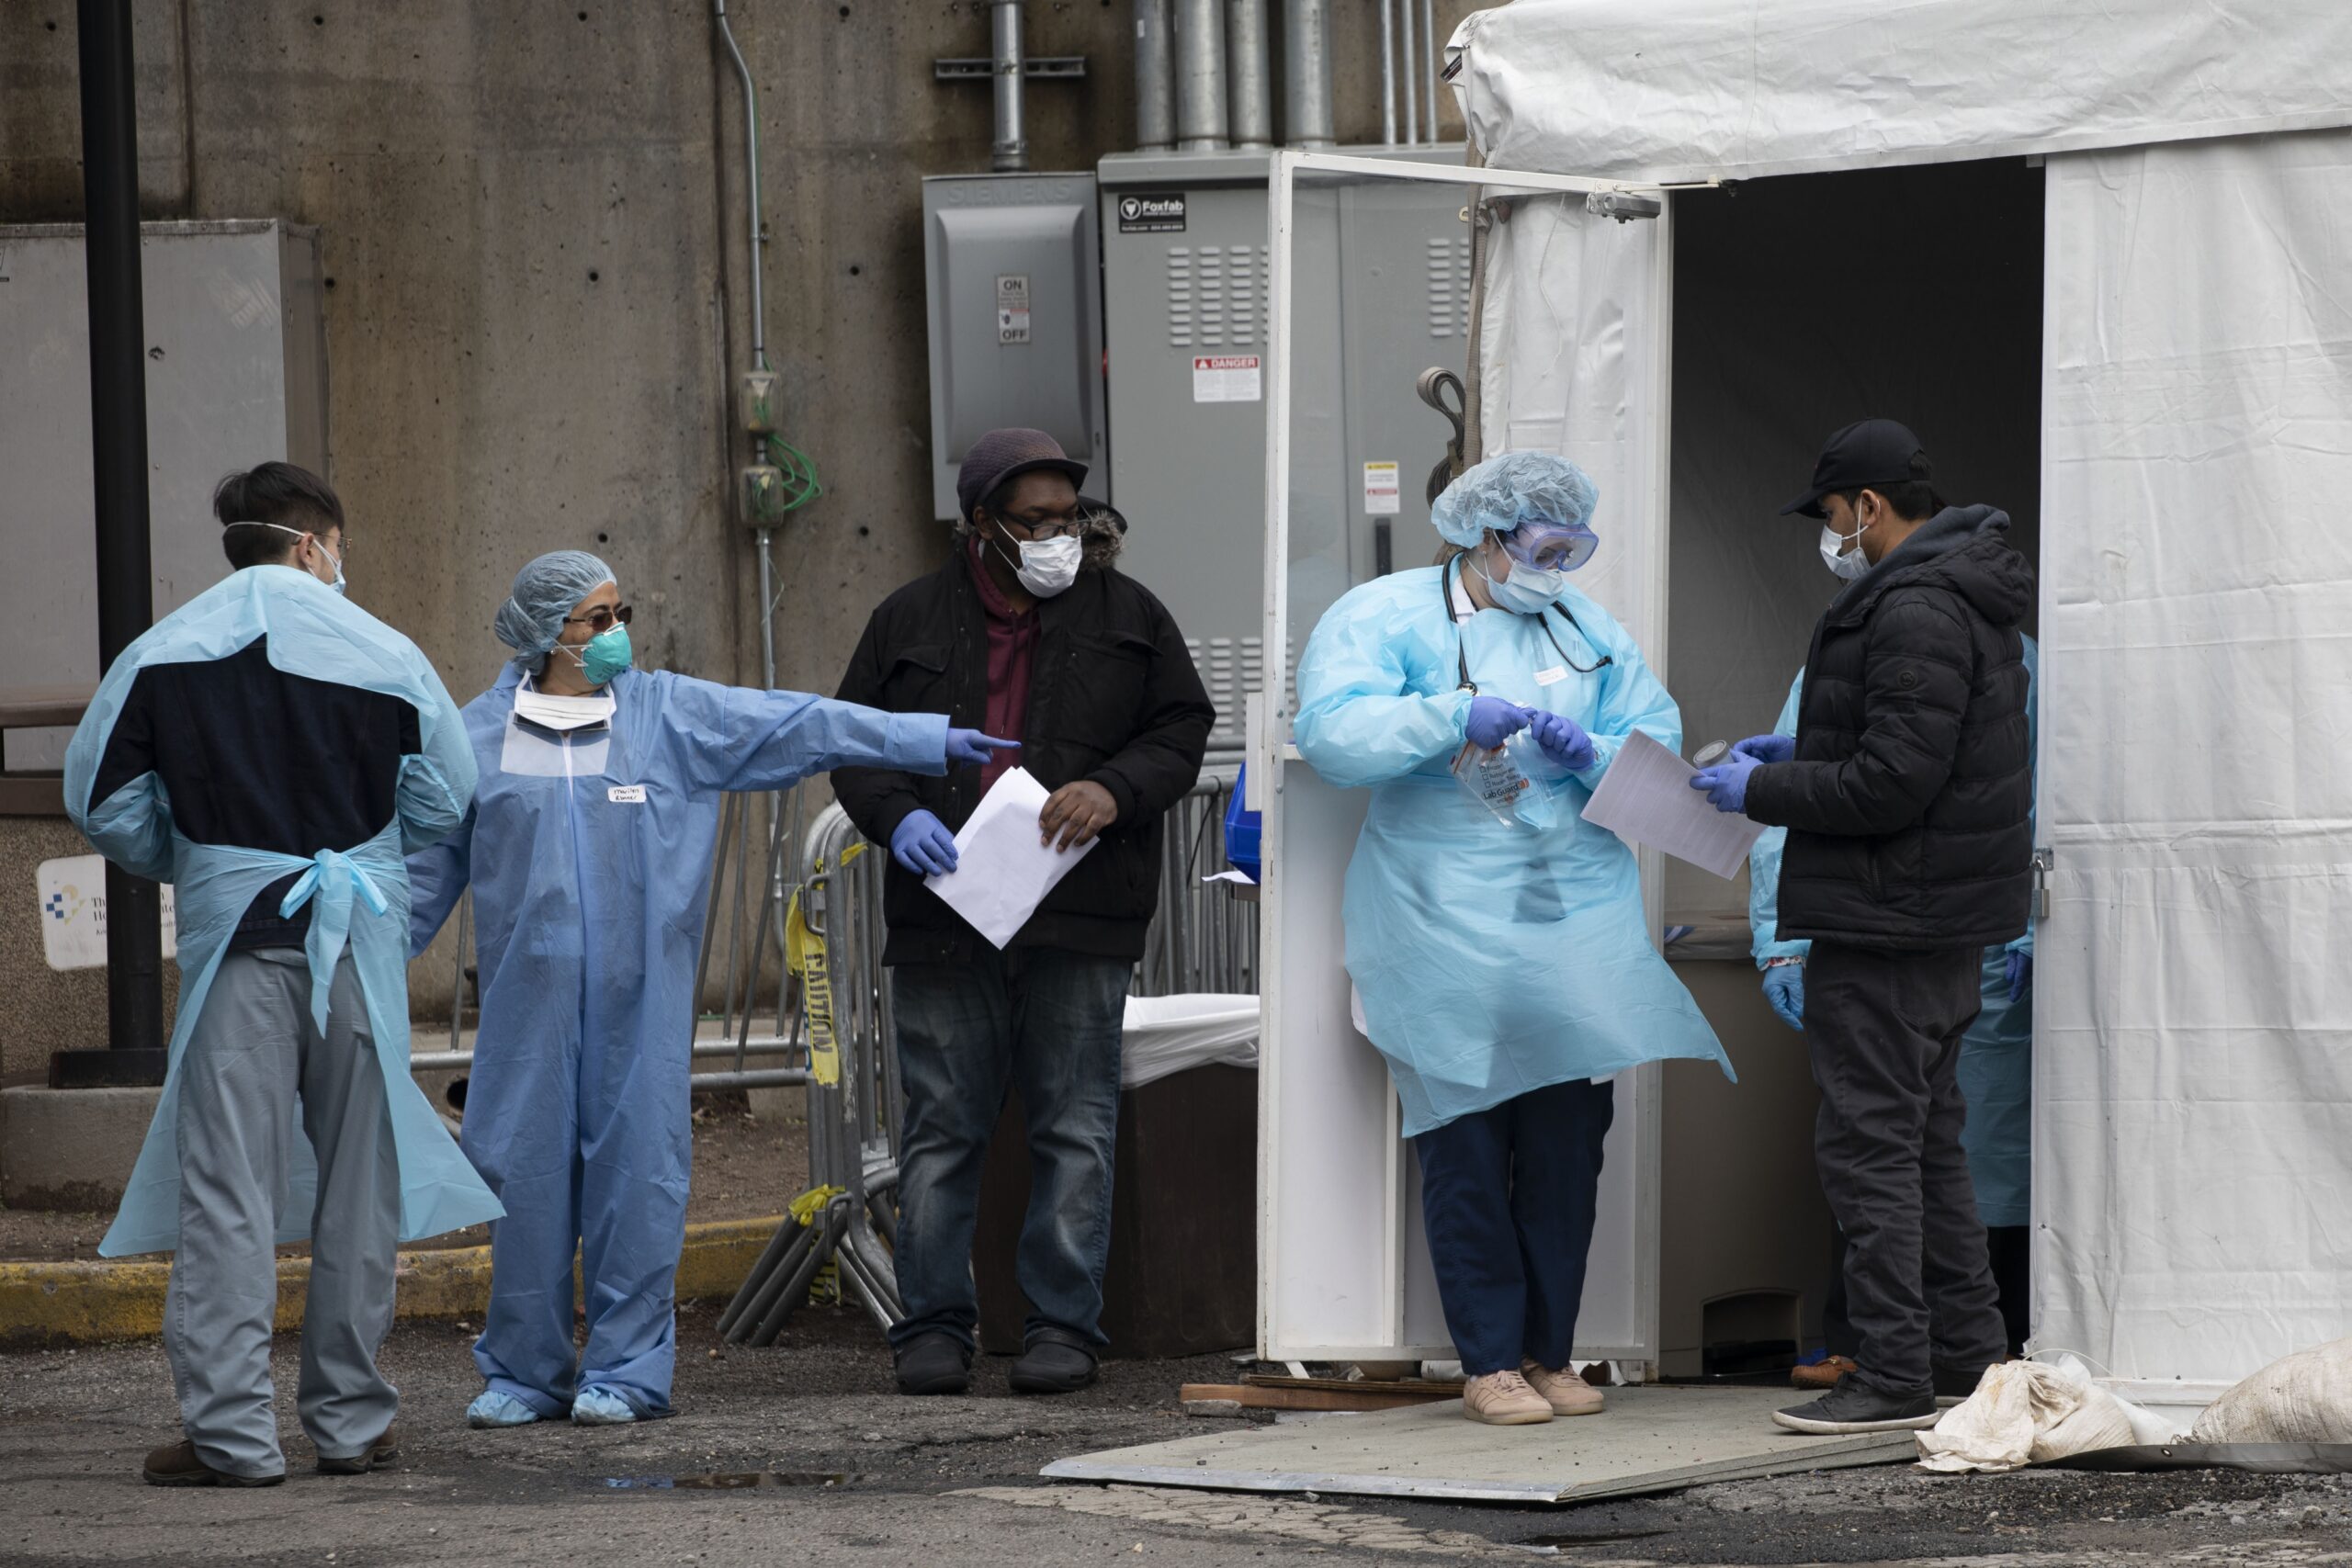 Hospital personnel assist people at a coronavirus screening tent outside the Brooklyn Hospital Center